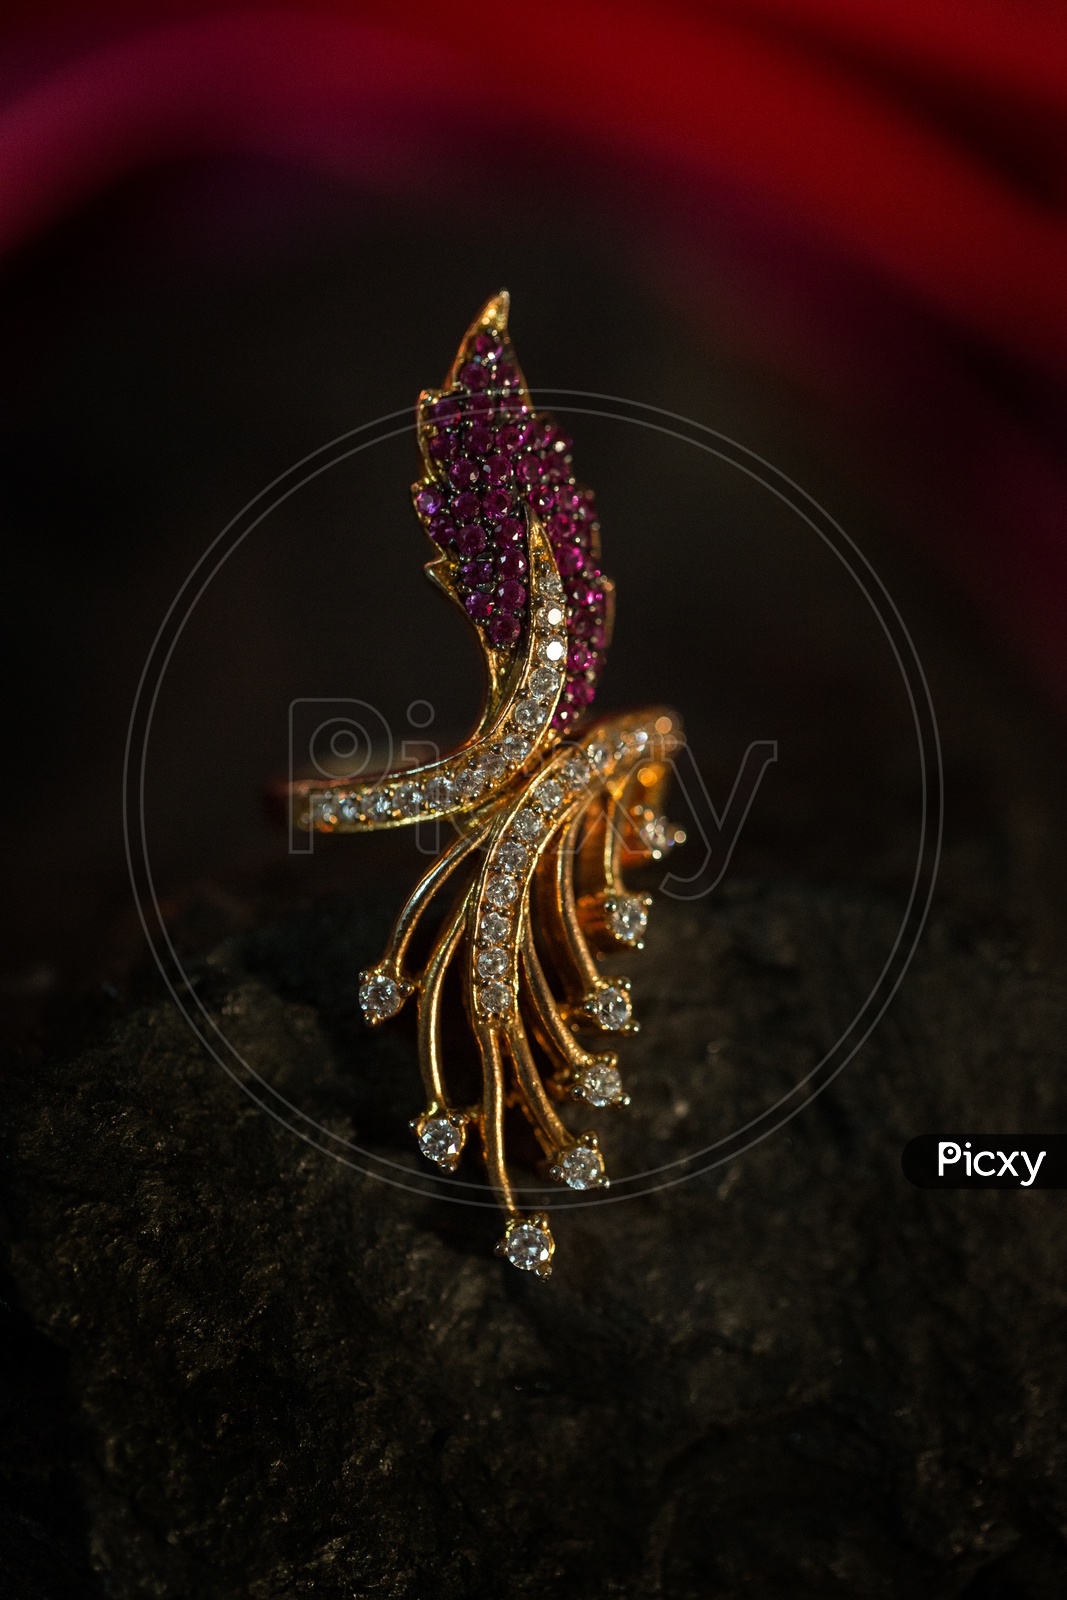 Indian Made Gold Jewellery Gold Ring With Design on it  Closeup Shot